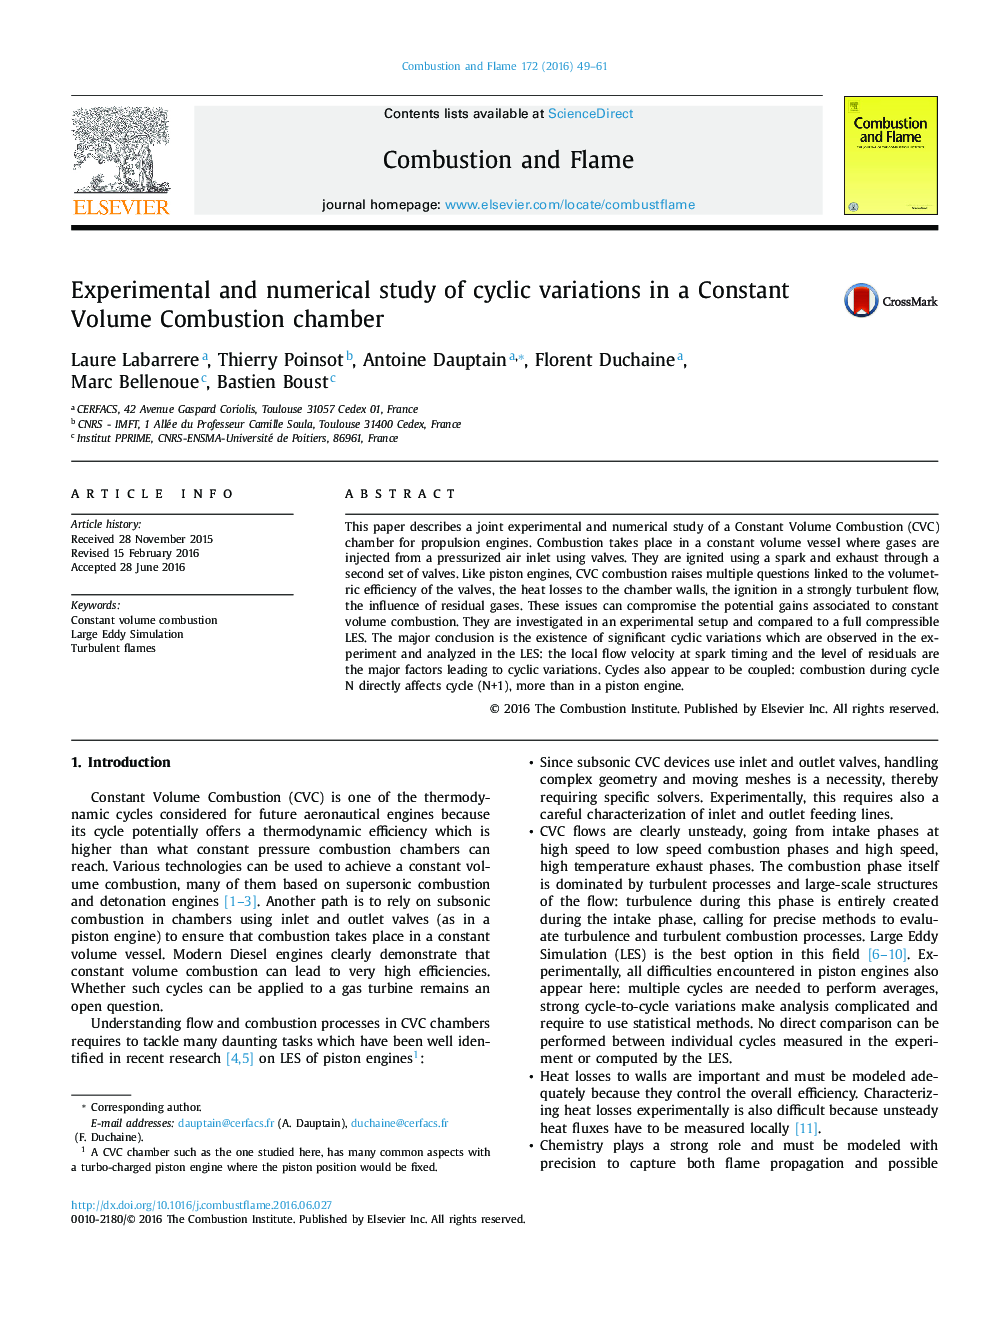 Experimental and numerical study of cyclic variations in a Constant Volume Combustion chamber